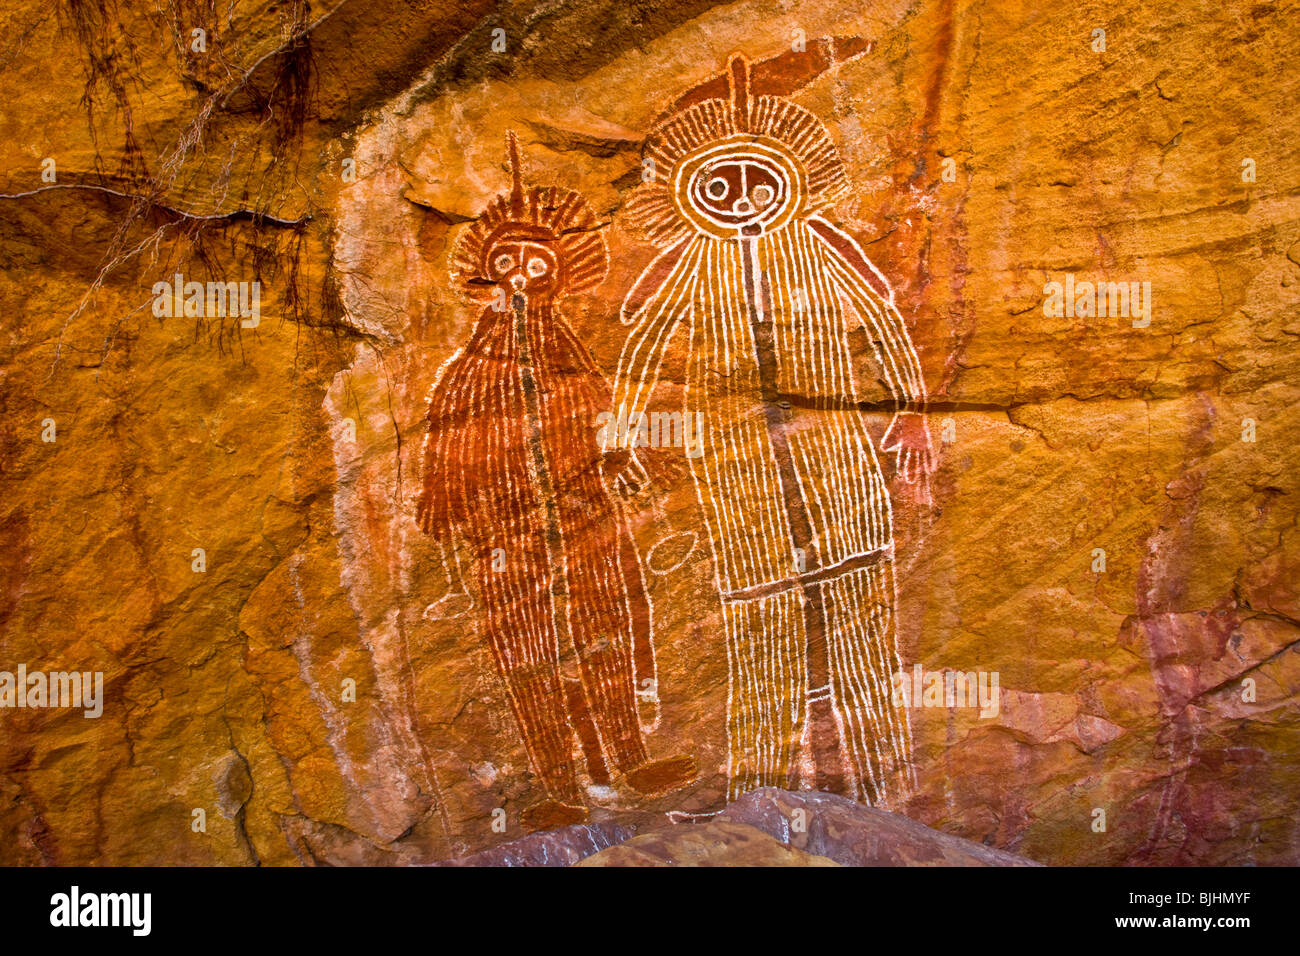 The Lightning Brothers, outback Australia, ancient aboriginal paintings, Hardaman style, location secret to protect art Stock Photo